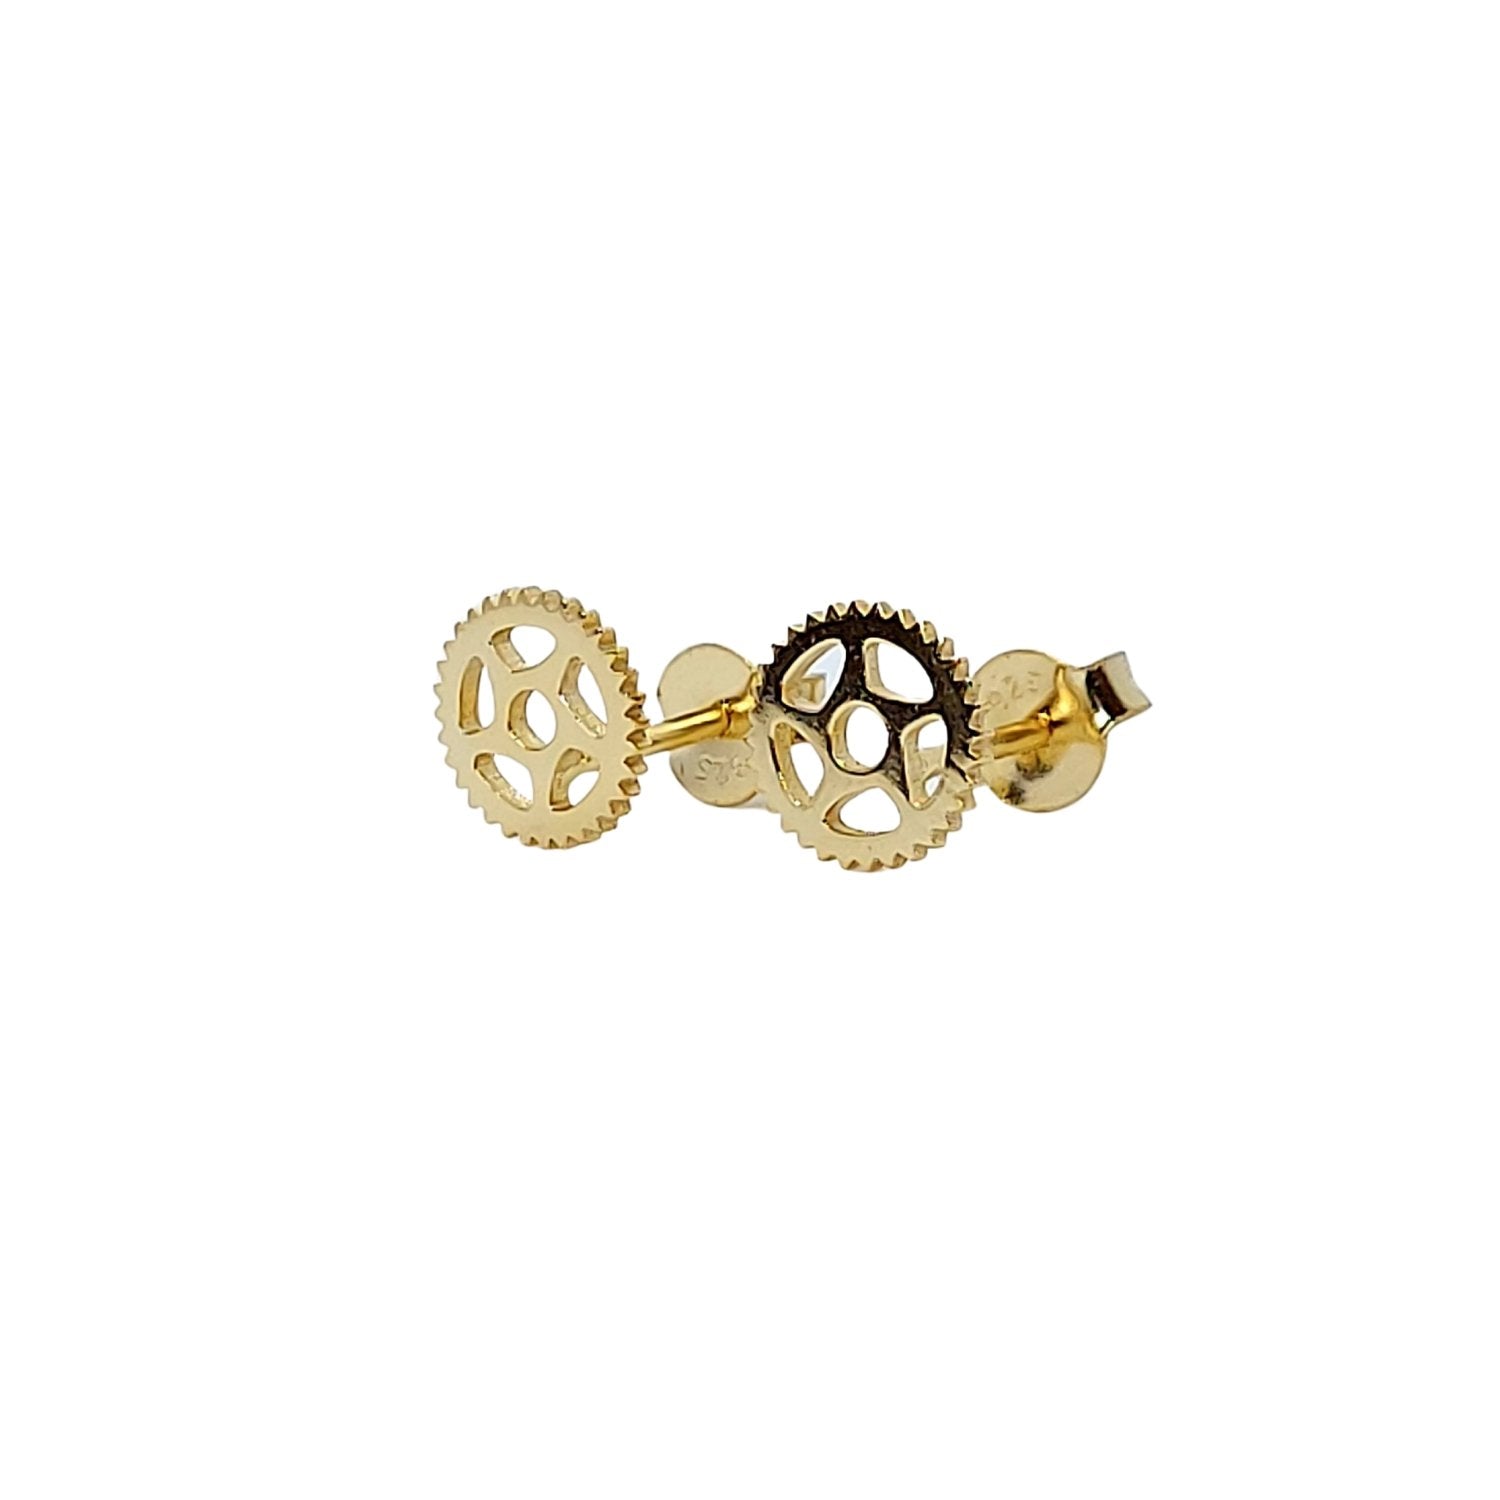 18k yellow gold bike chain ring stud earrings with white background